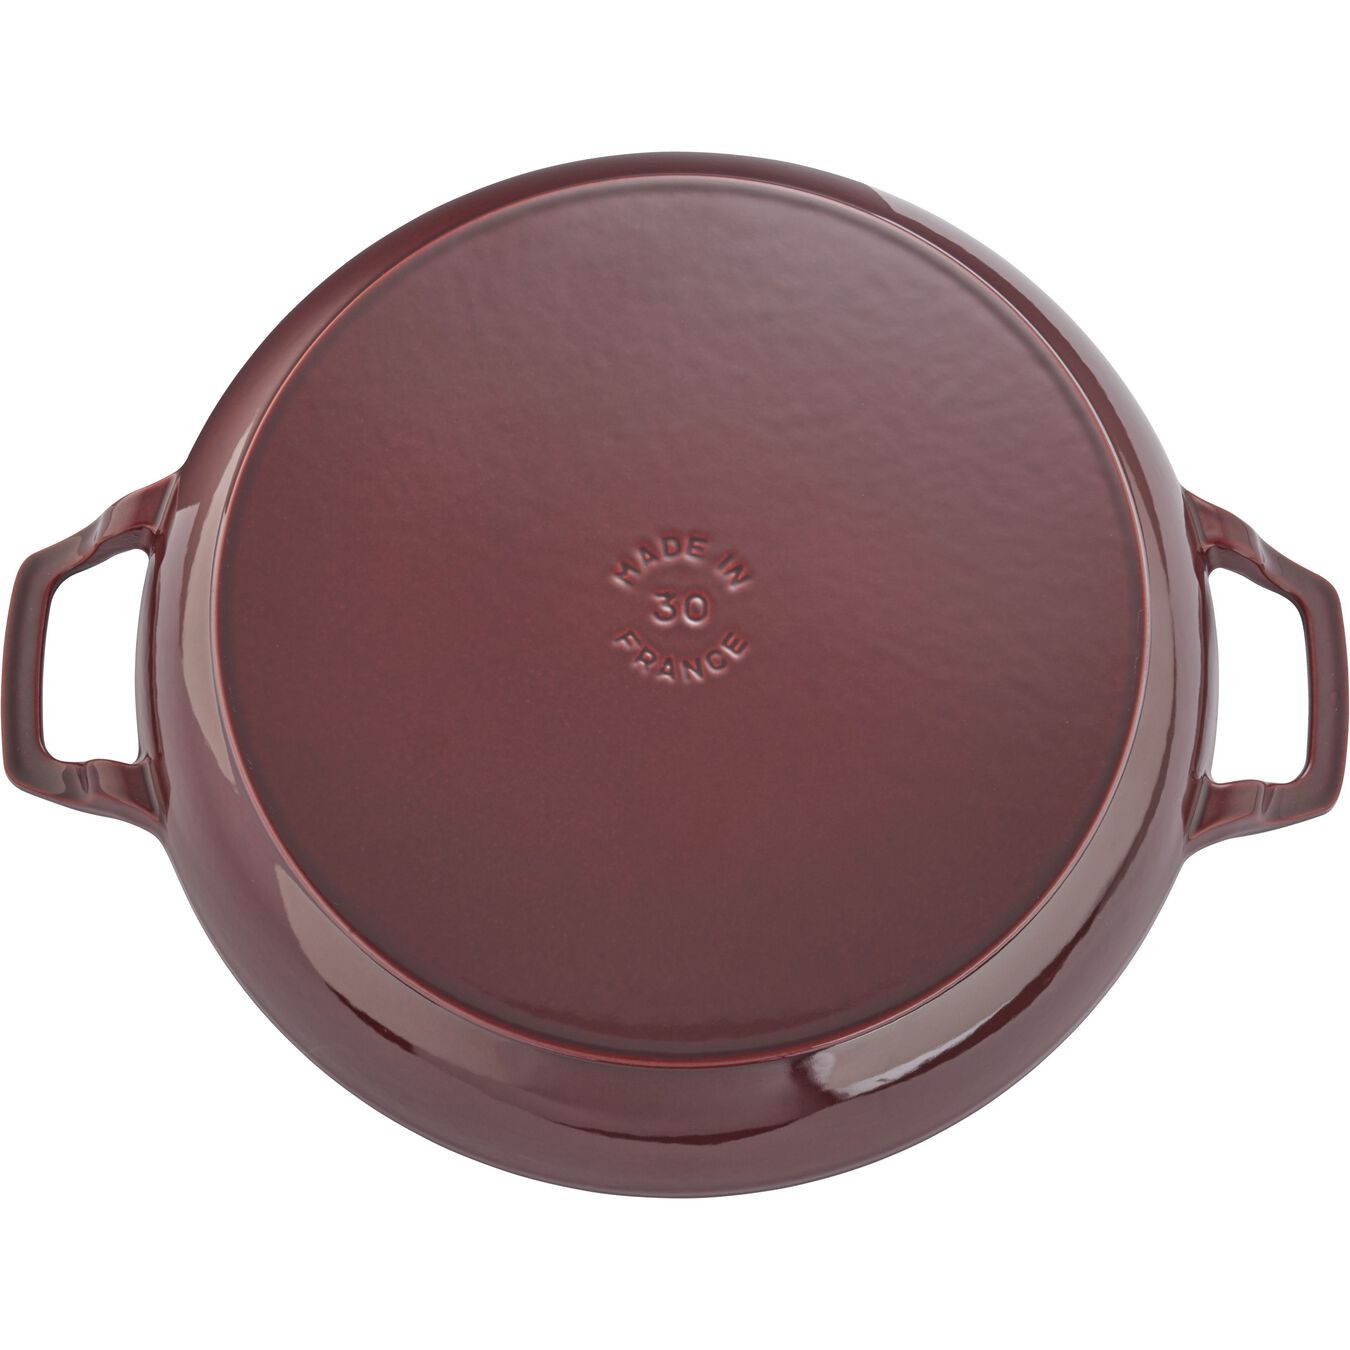 3.5 l cast iron round Saute pan with glass lid, grenadine-red - Visual Imperfections,,large 3